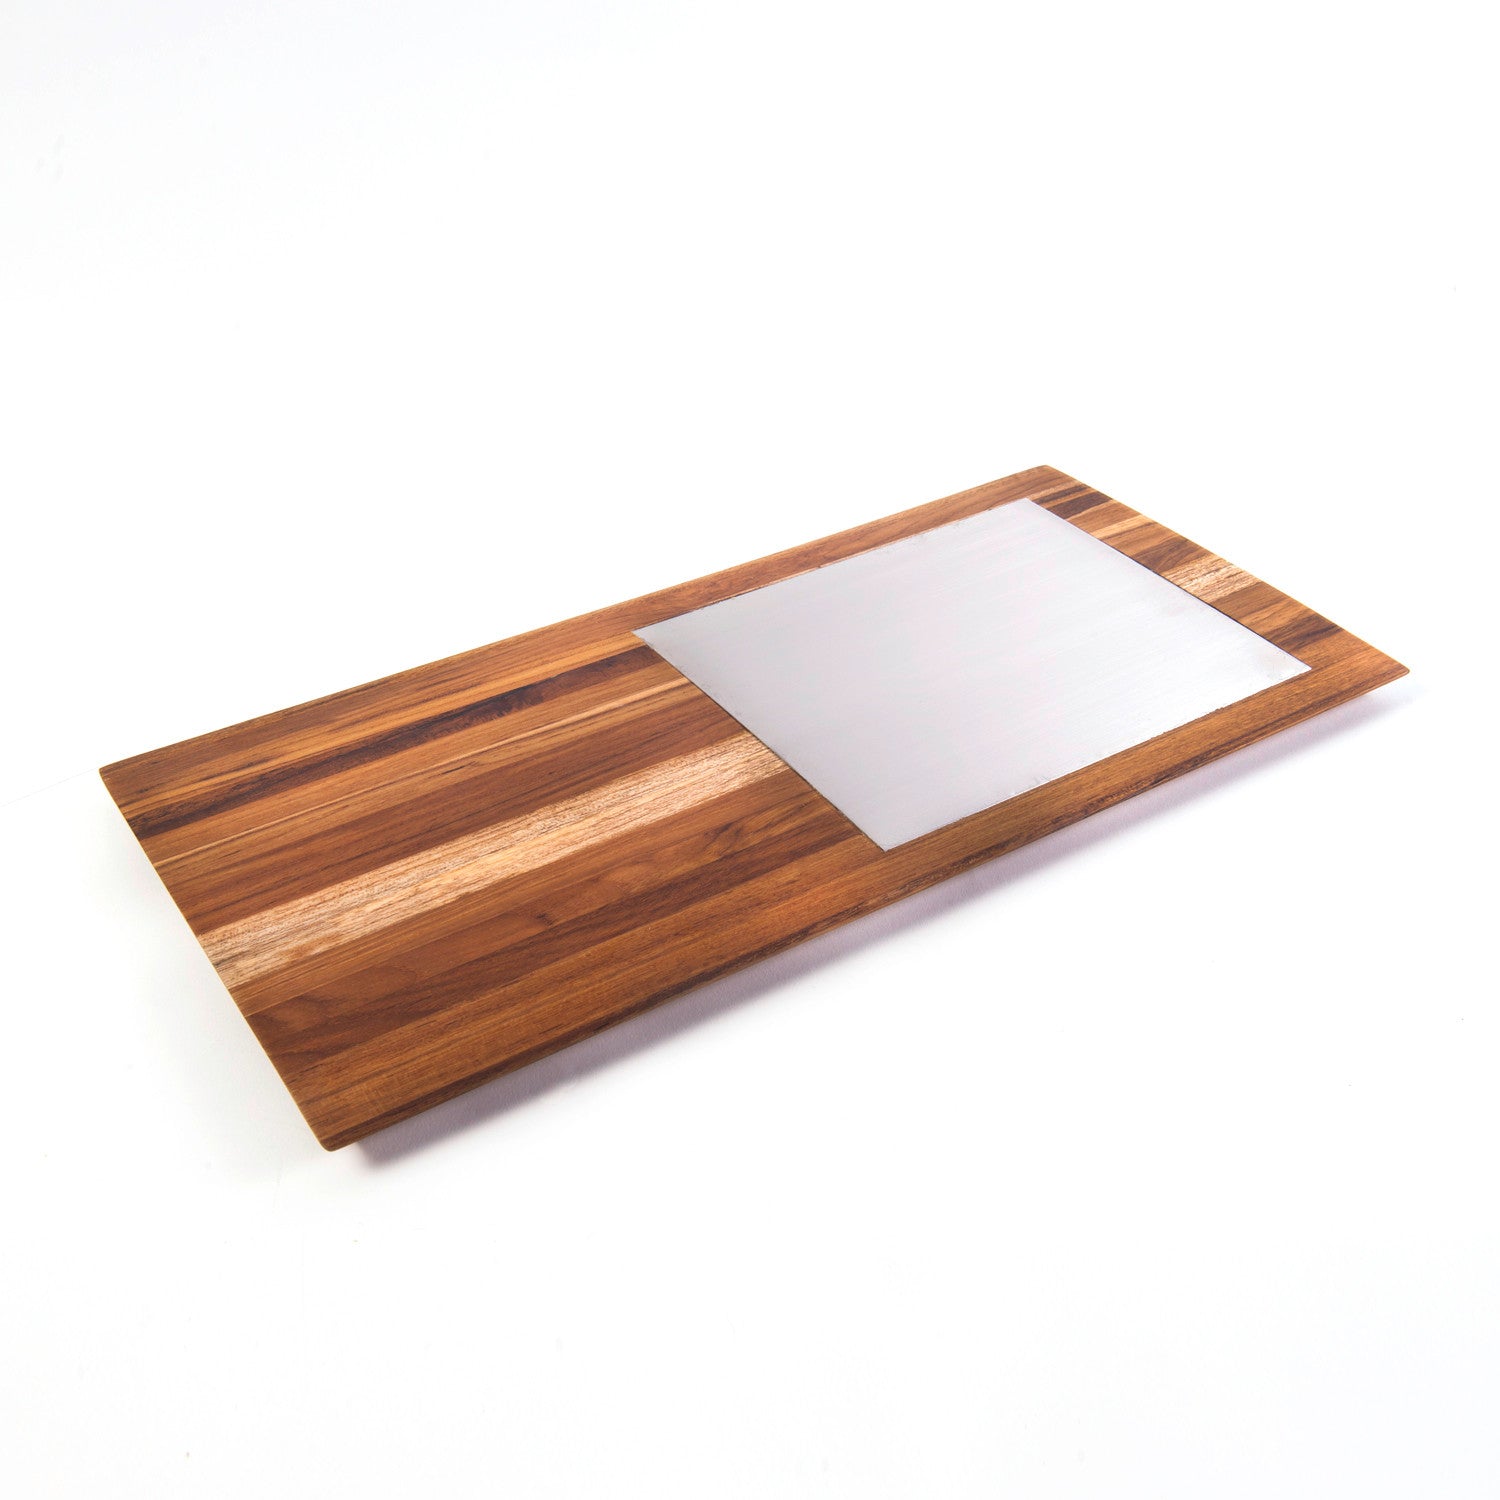 Laminated Teak Cheese Board With Stainless Steel Inlaid 8X23L